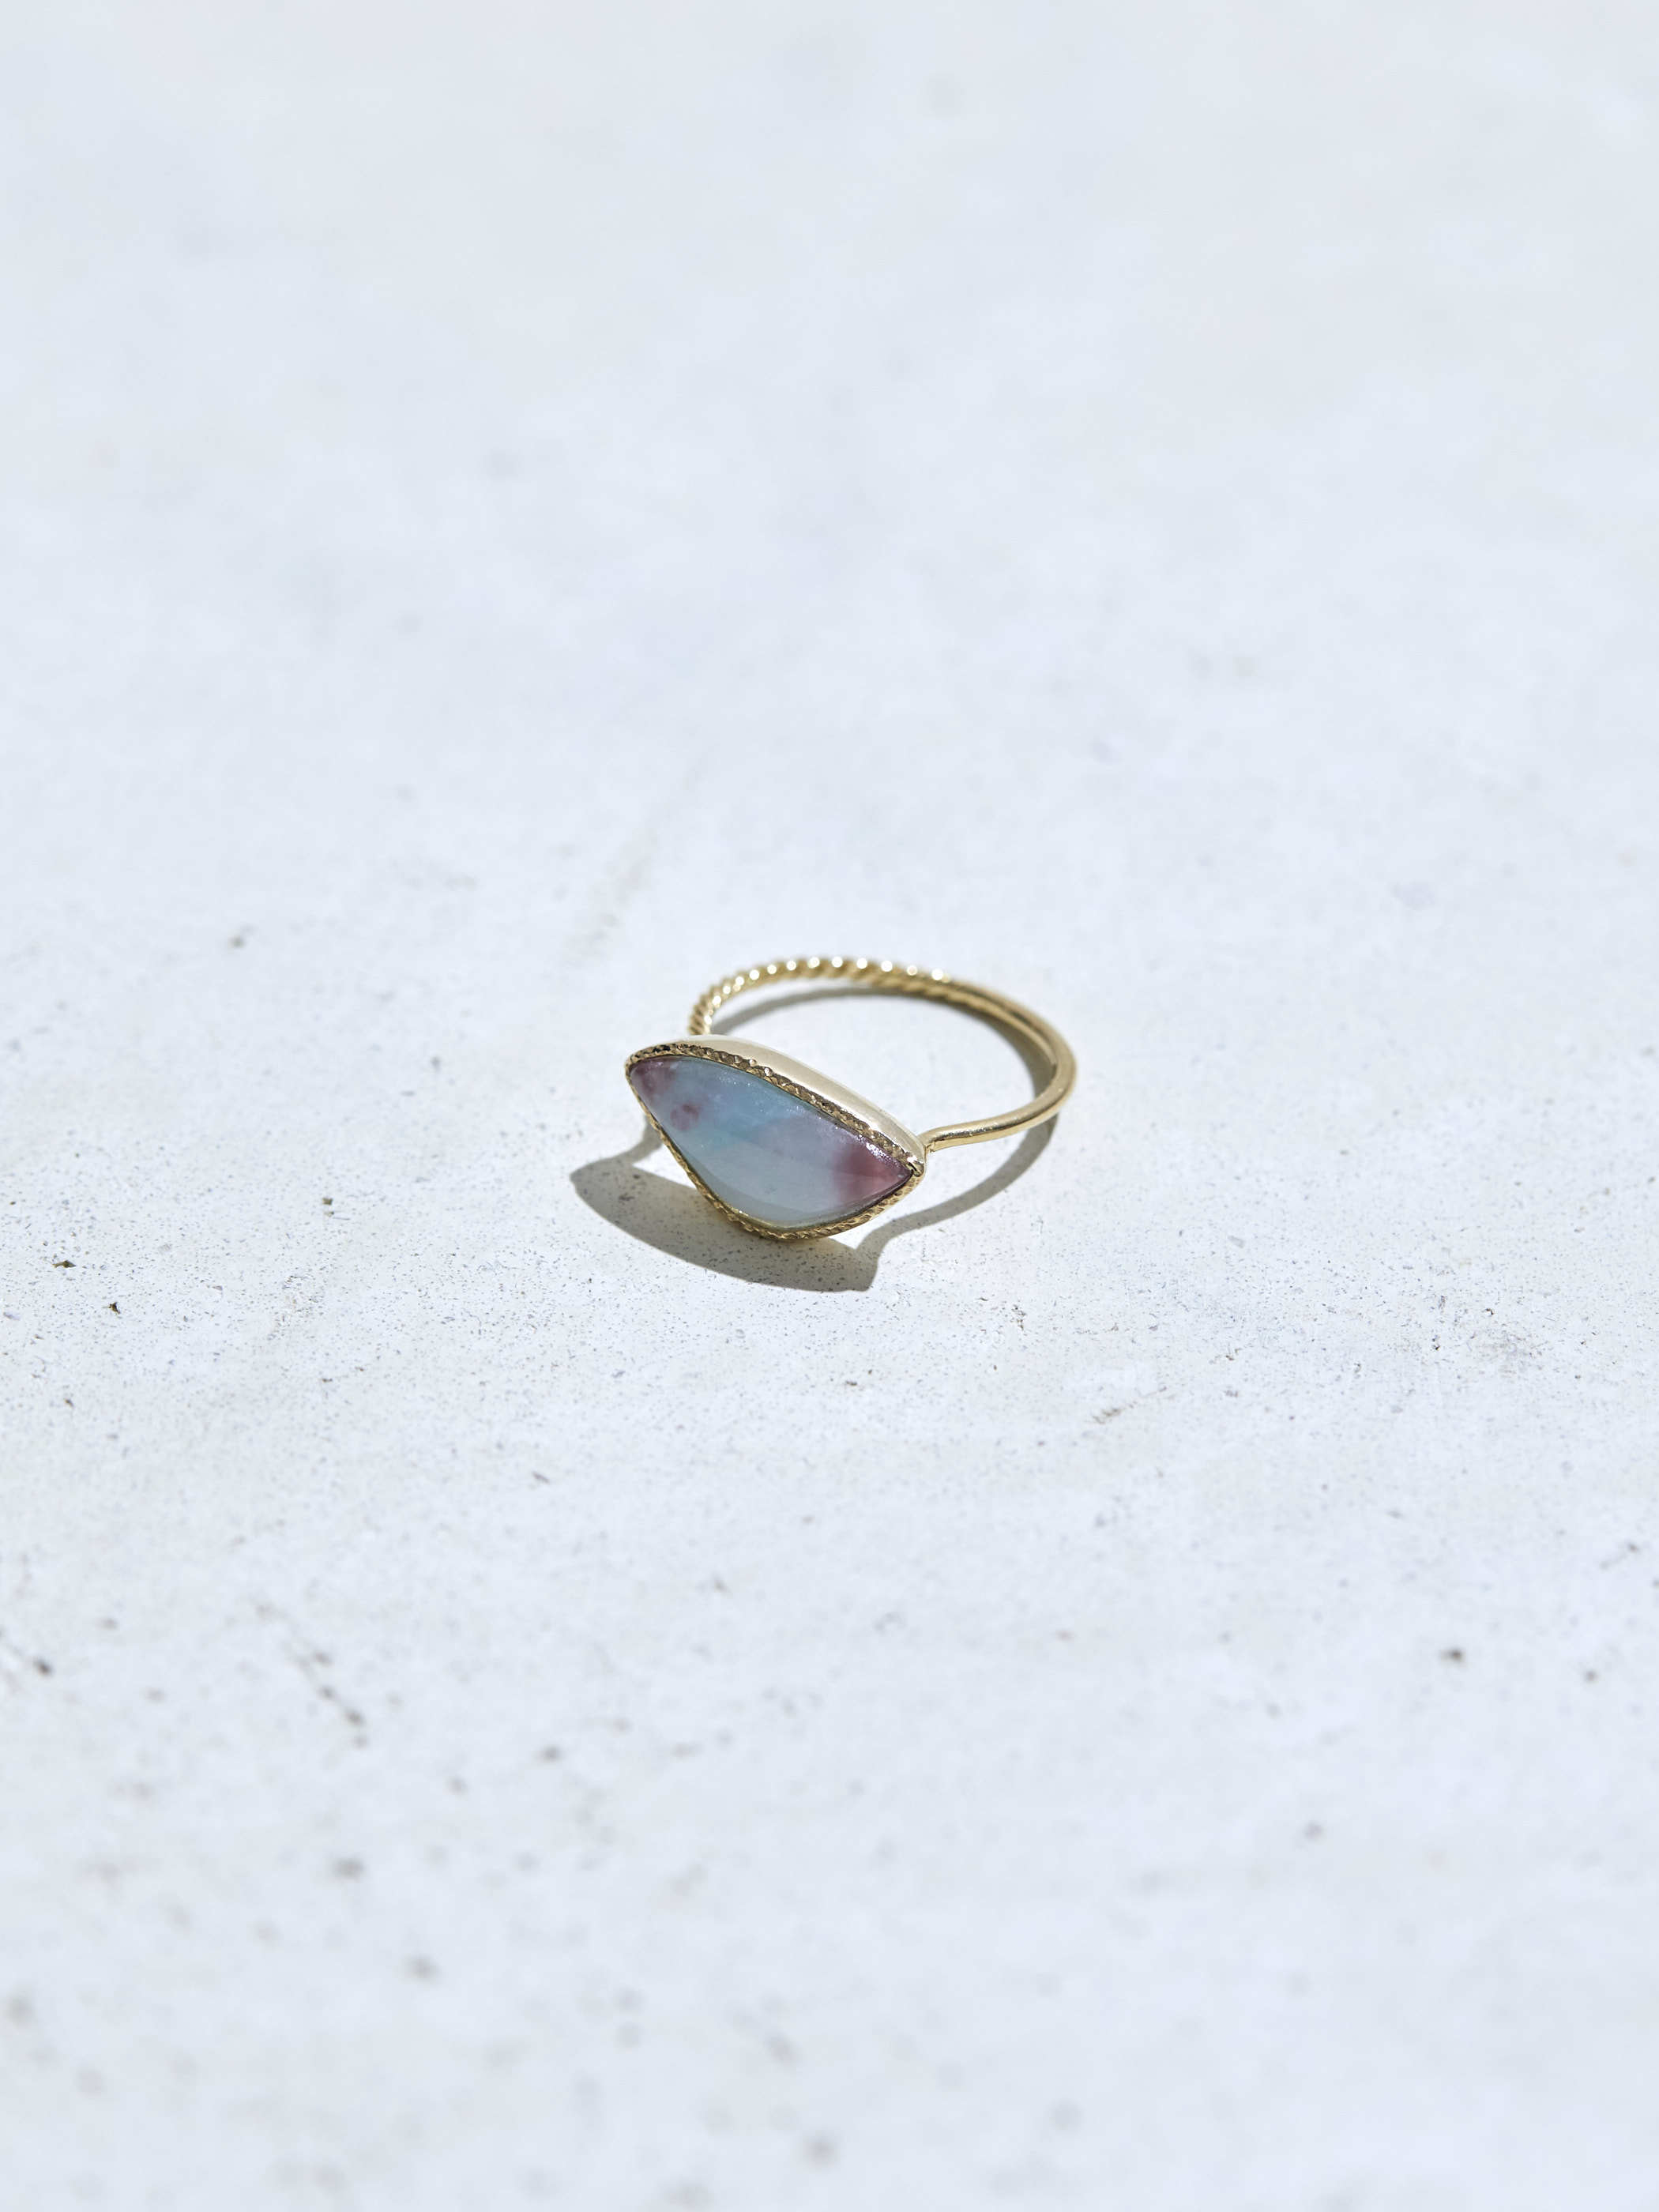 【SOLD OUT】PARAIBA TOURMALINE IN QUARTZ FRUITY RING